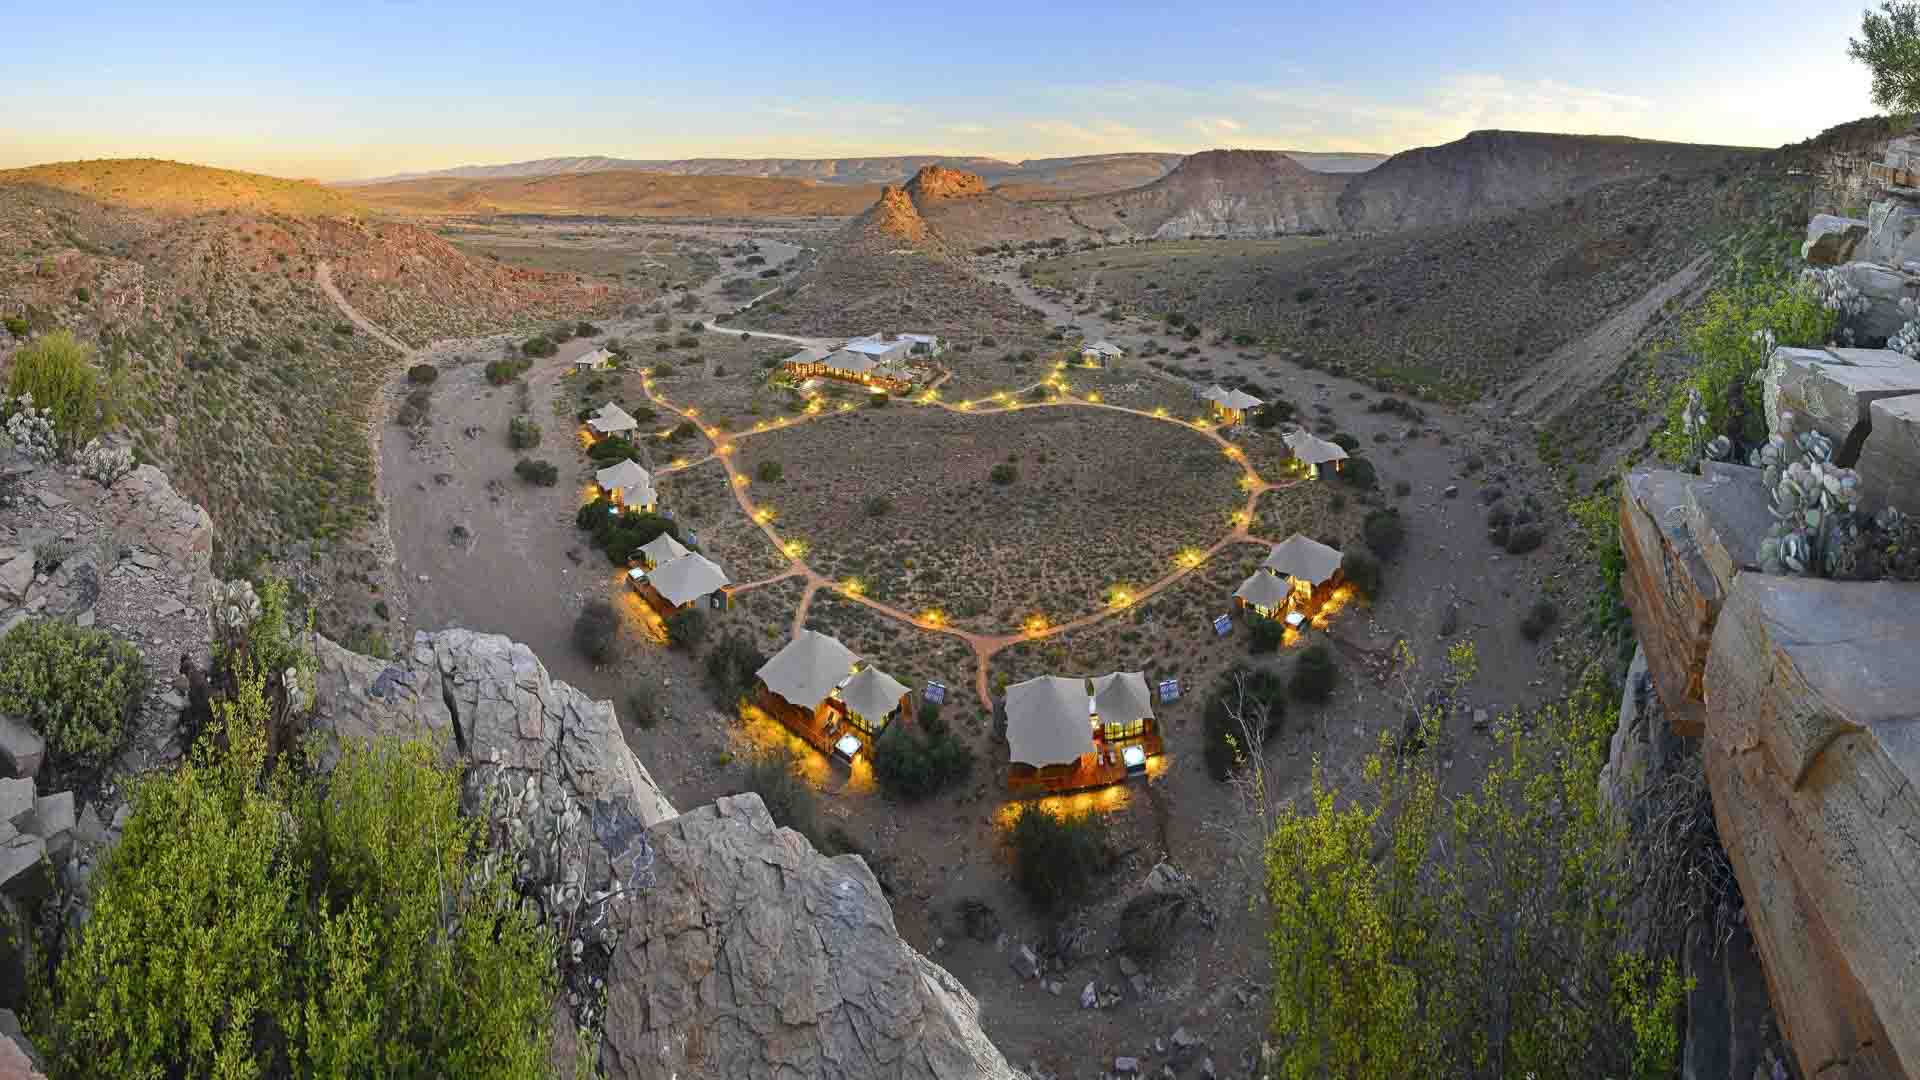 A birds-eye-view of the stunning Dwyka Tented Lodge at Sanbona Wildlife Reserve - stay here as part of your off the beaten track Southern Africa safari.